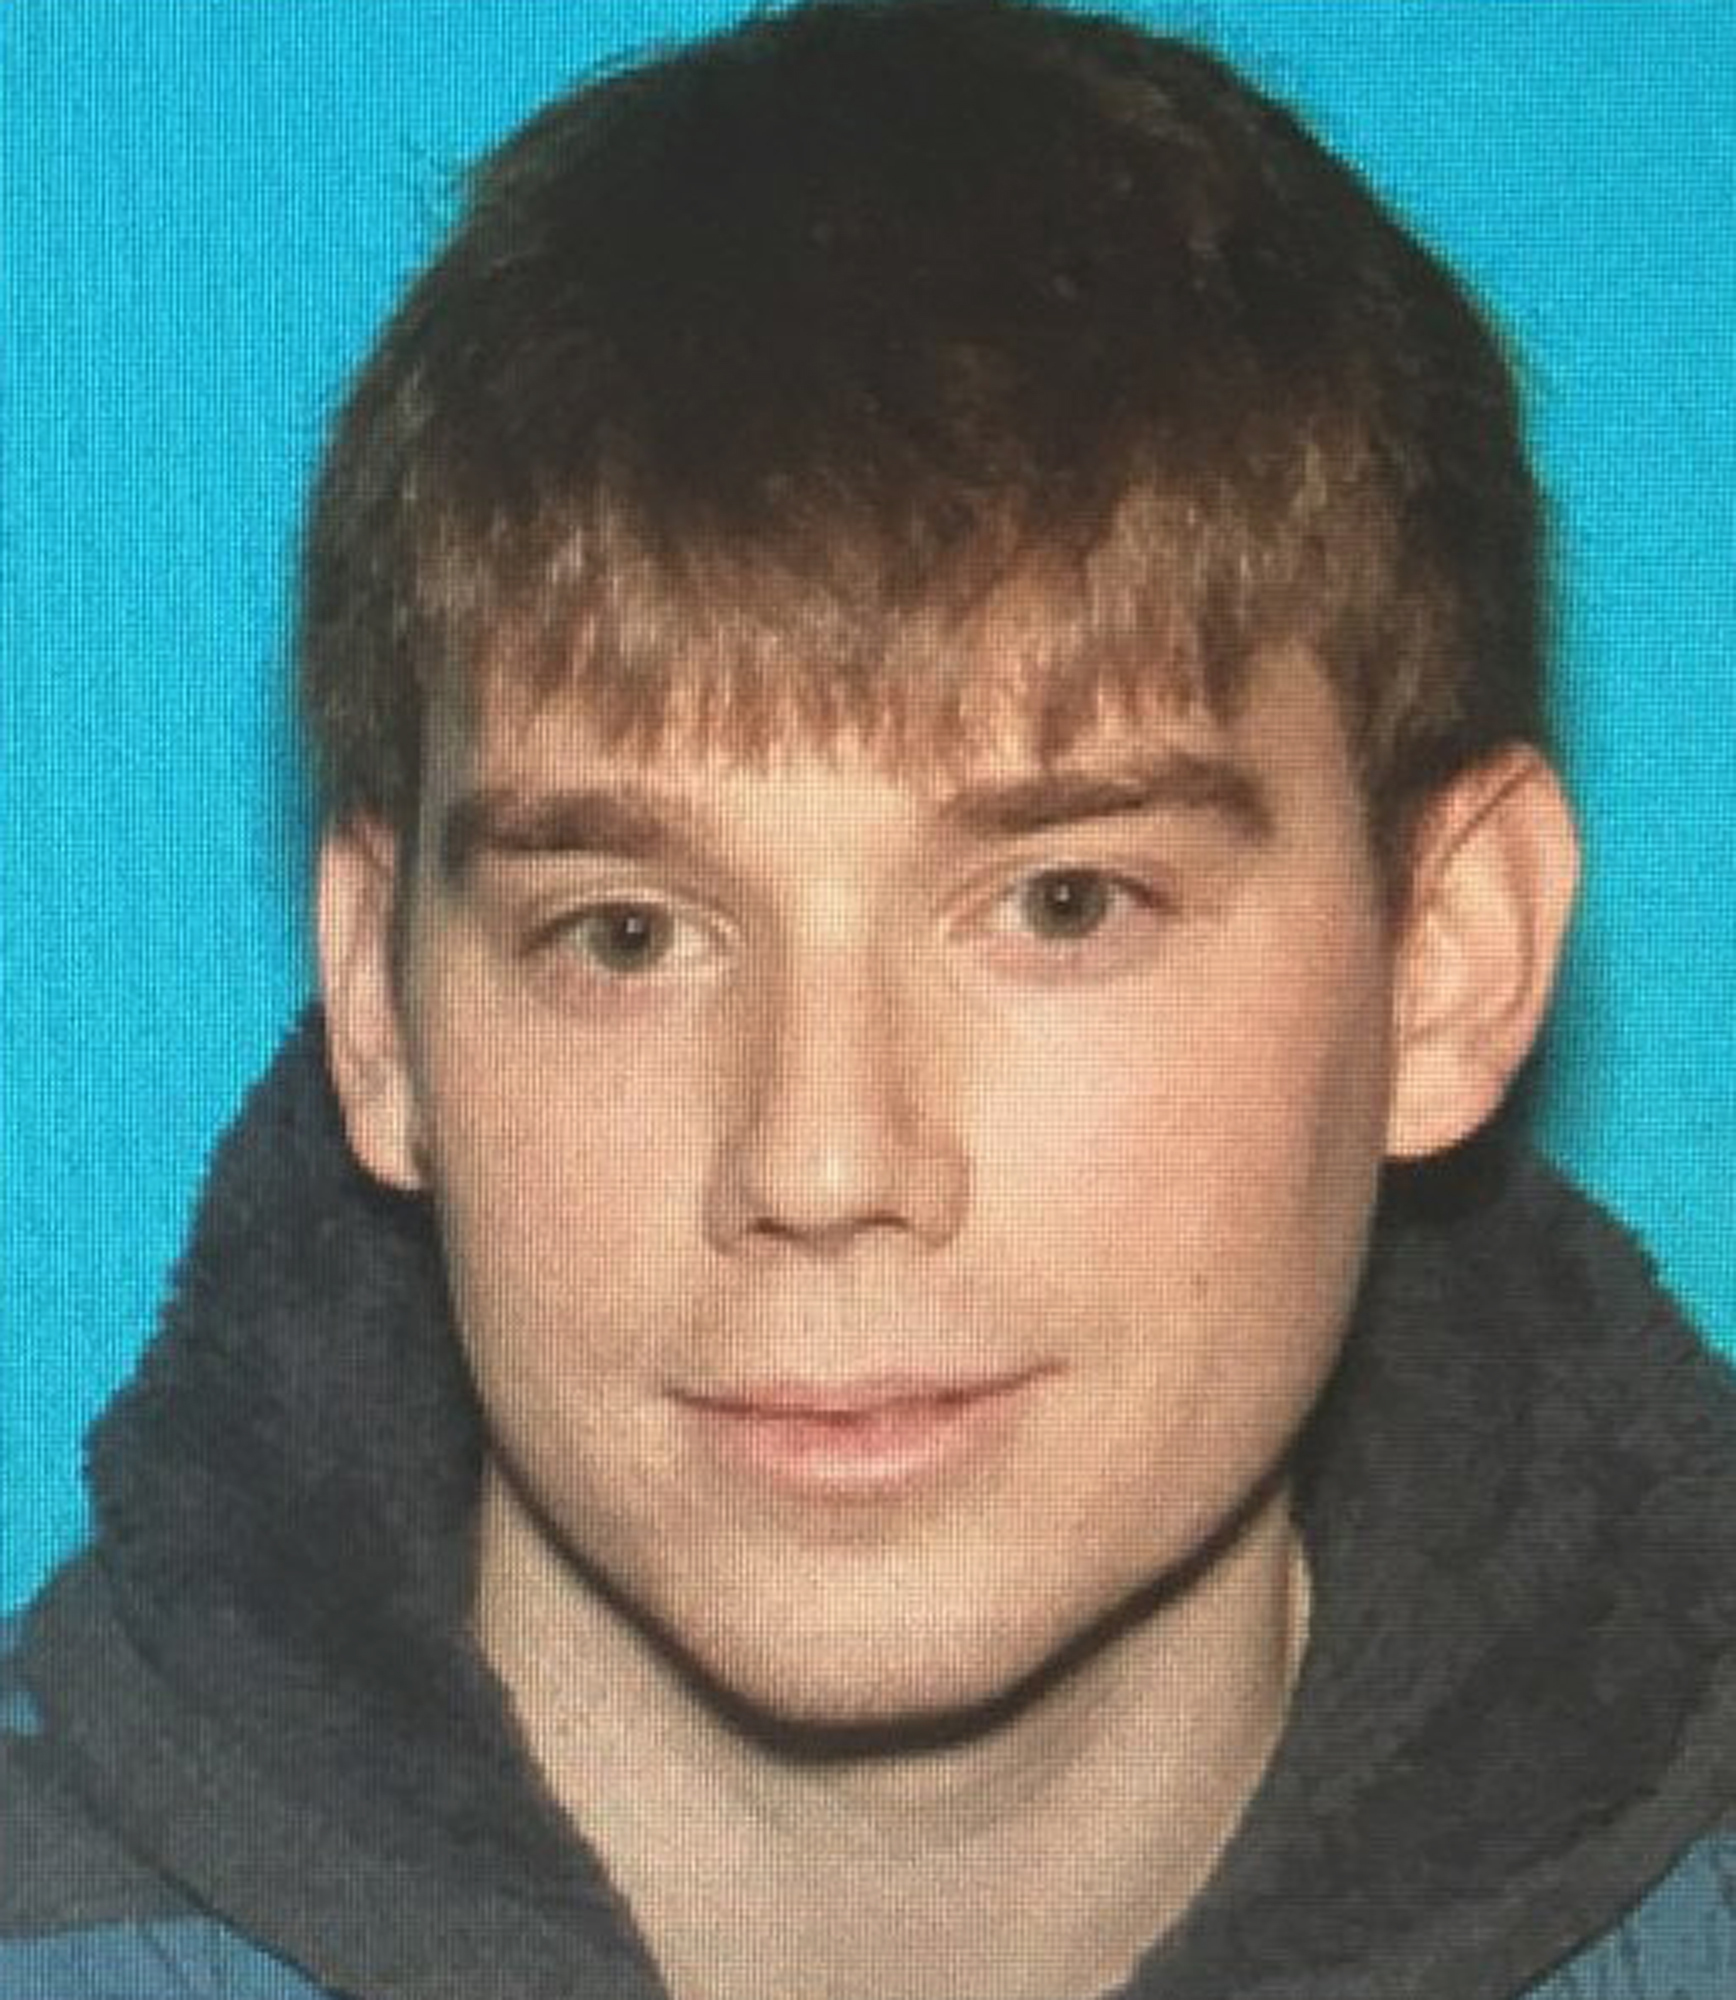 Travis Reinking, the suspect in a shooting at a Waffle House near Nashville